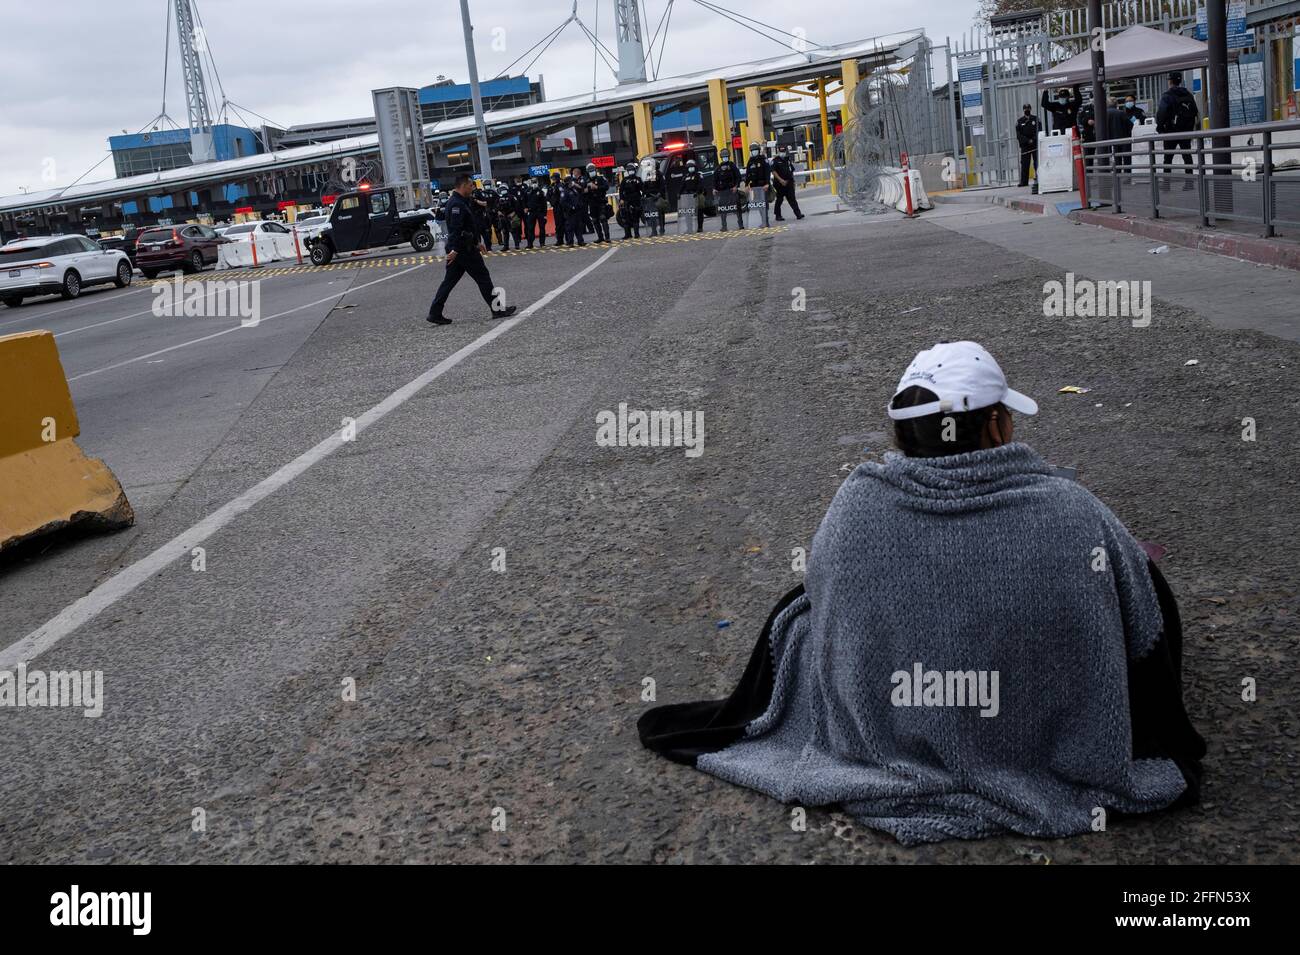 An asylum-seeking migrant sits on the ground as Central American migrants protest to demand access and asylum in the United States from U.S. President Joe Biden, at the Mexico-US San Ysidro border crossing in Tijuana, Mexico, April 23, 2021. Picture taken April 23, 2021. REUTERS/Toya Sarno Jordan Stock Photo